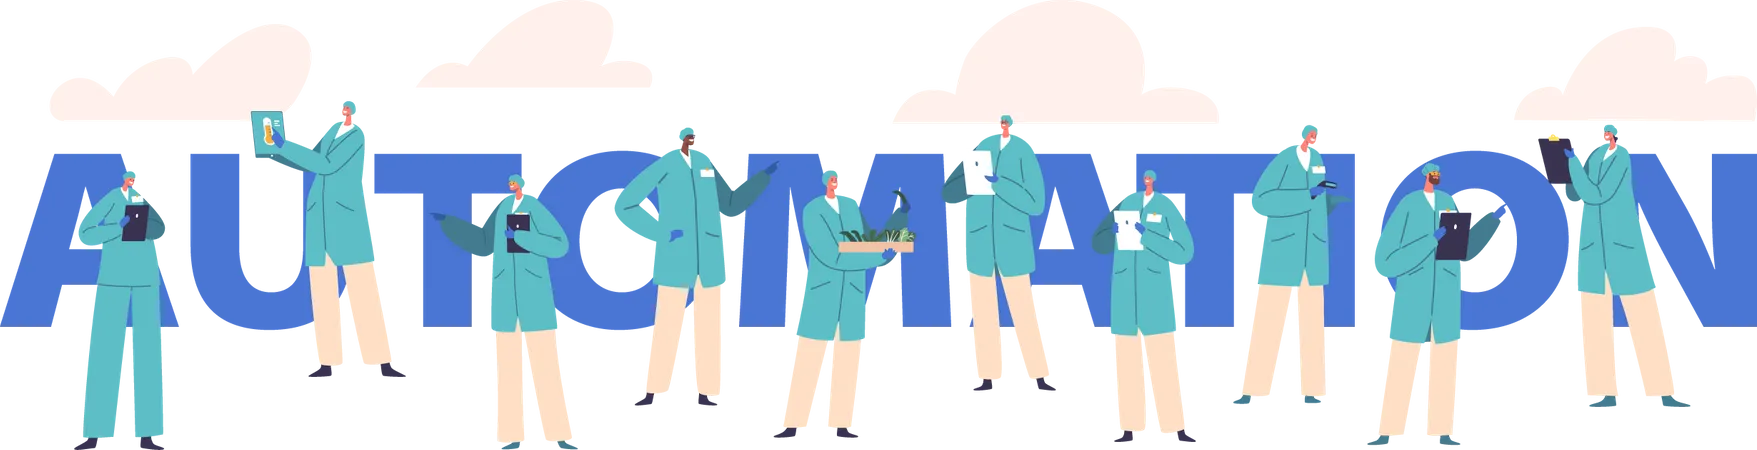 Automation Concept With Characters Holding Tablets Process Of Using Technology And Systems To Perform Tasks Without Human Intervention Enhancing Efficiency And Reducing Manual Effort Vector Banner Illustration